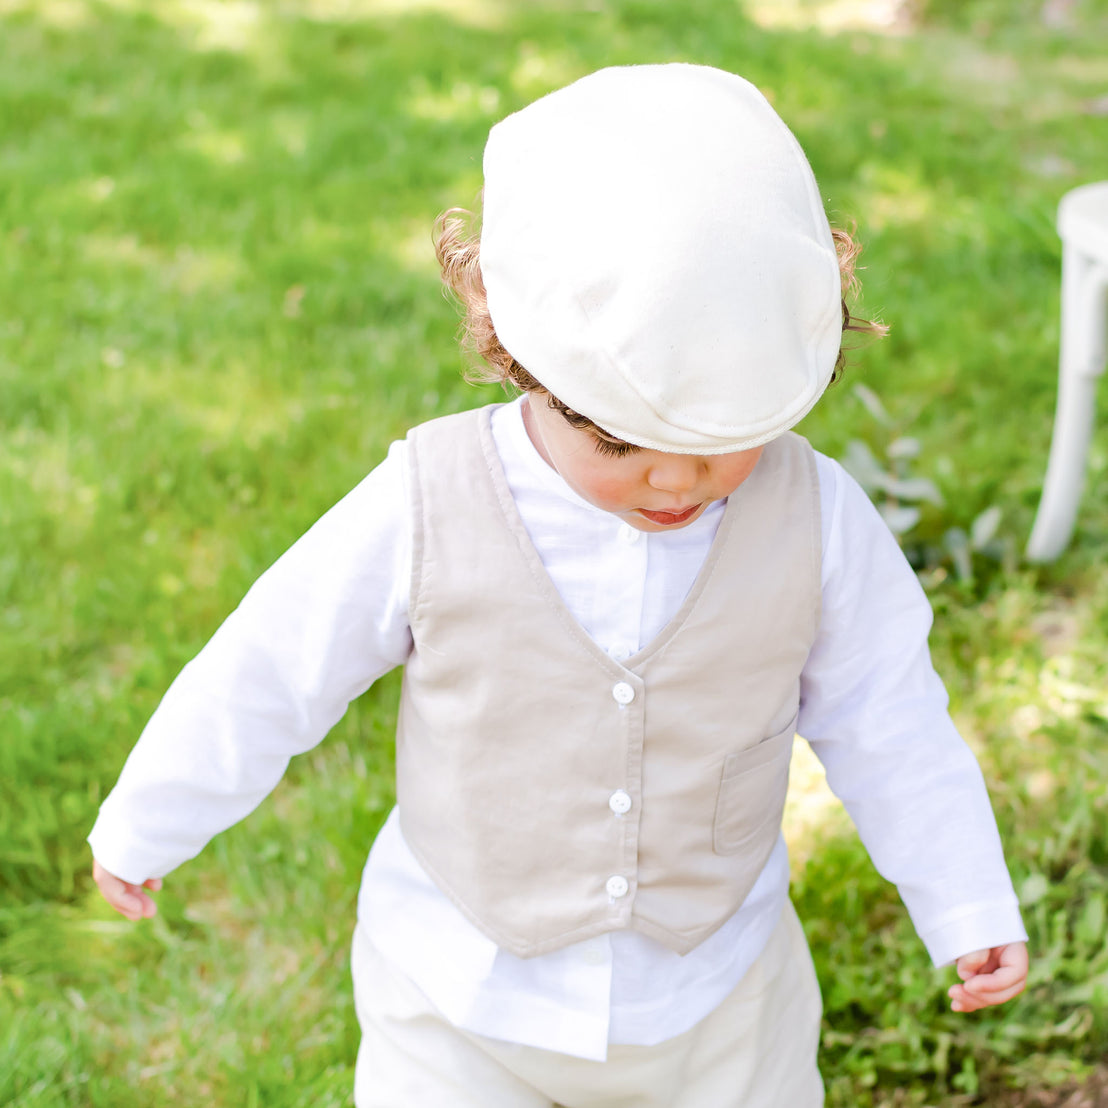 Photo of a baby boy outside in the forest. He is wearing the Silas Vest Suit that includes the vest, shorts, and onesie. He is also wearing the matching Silas newsboy cap